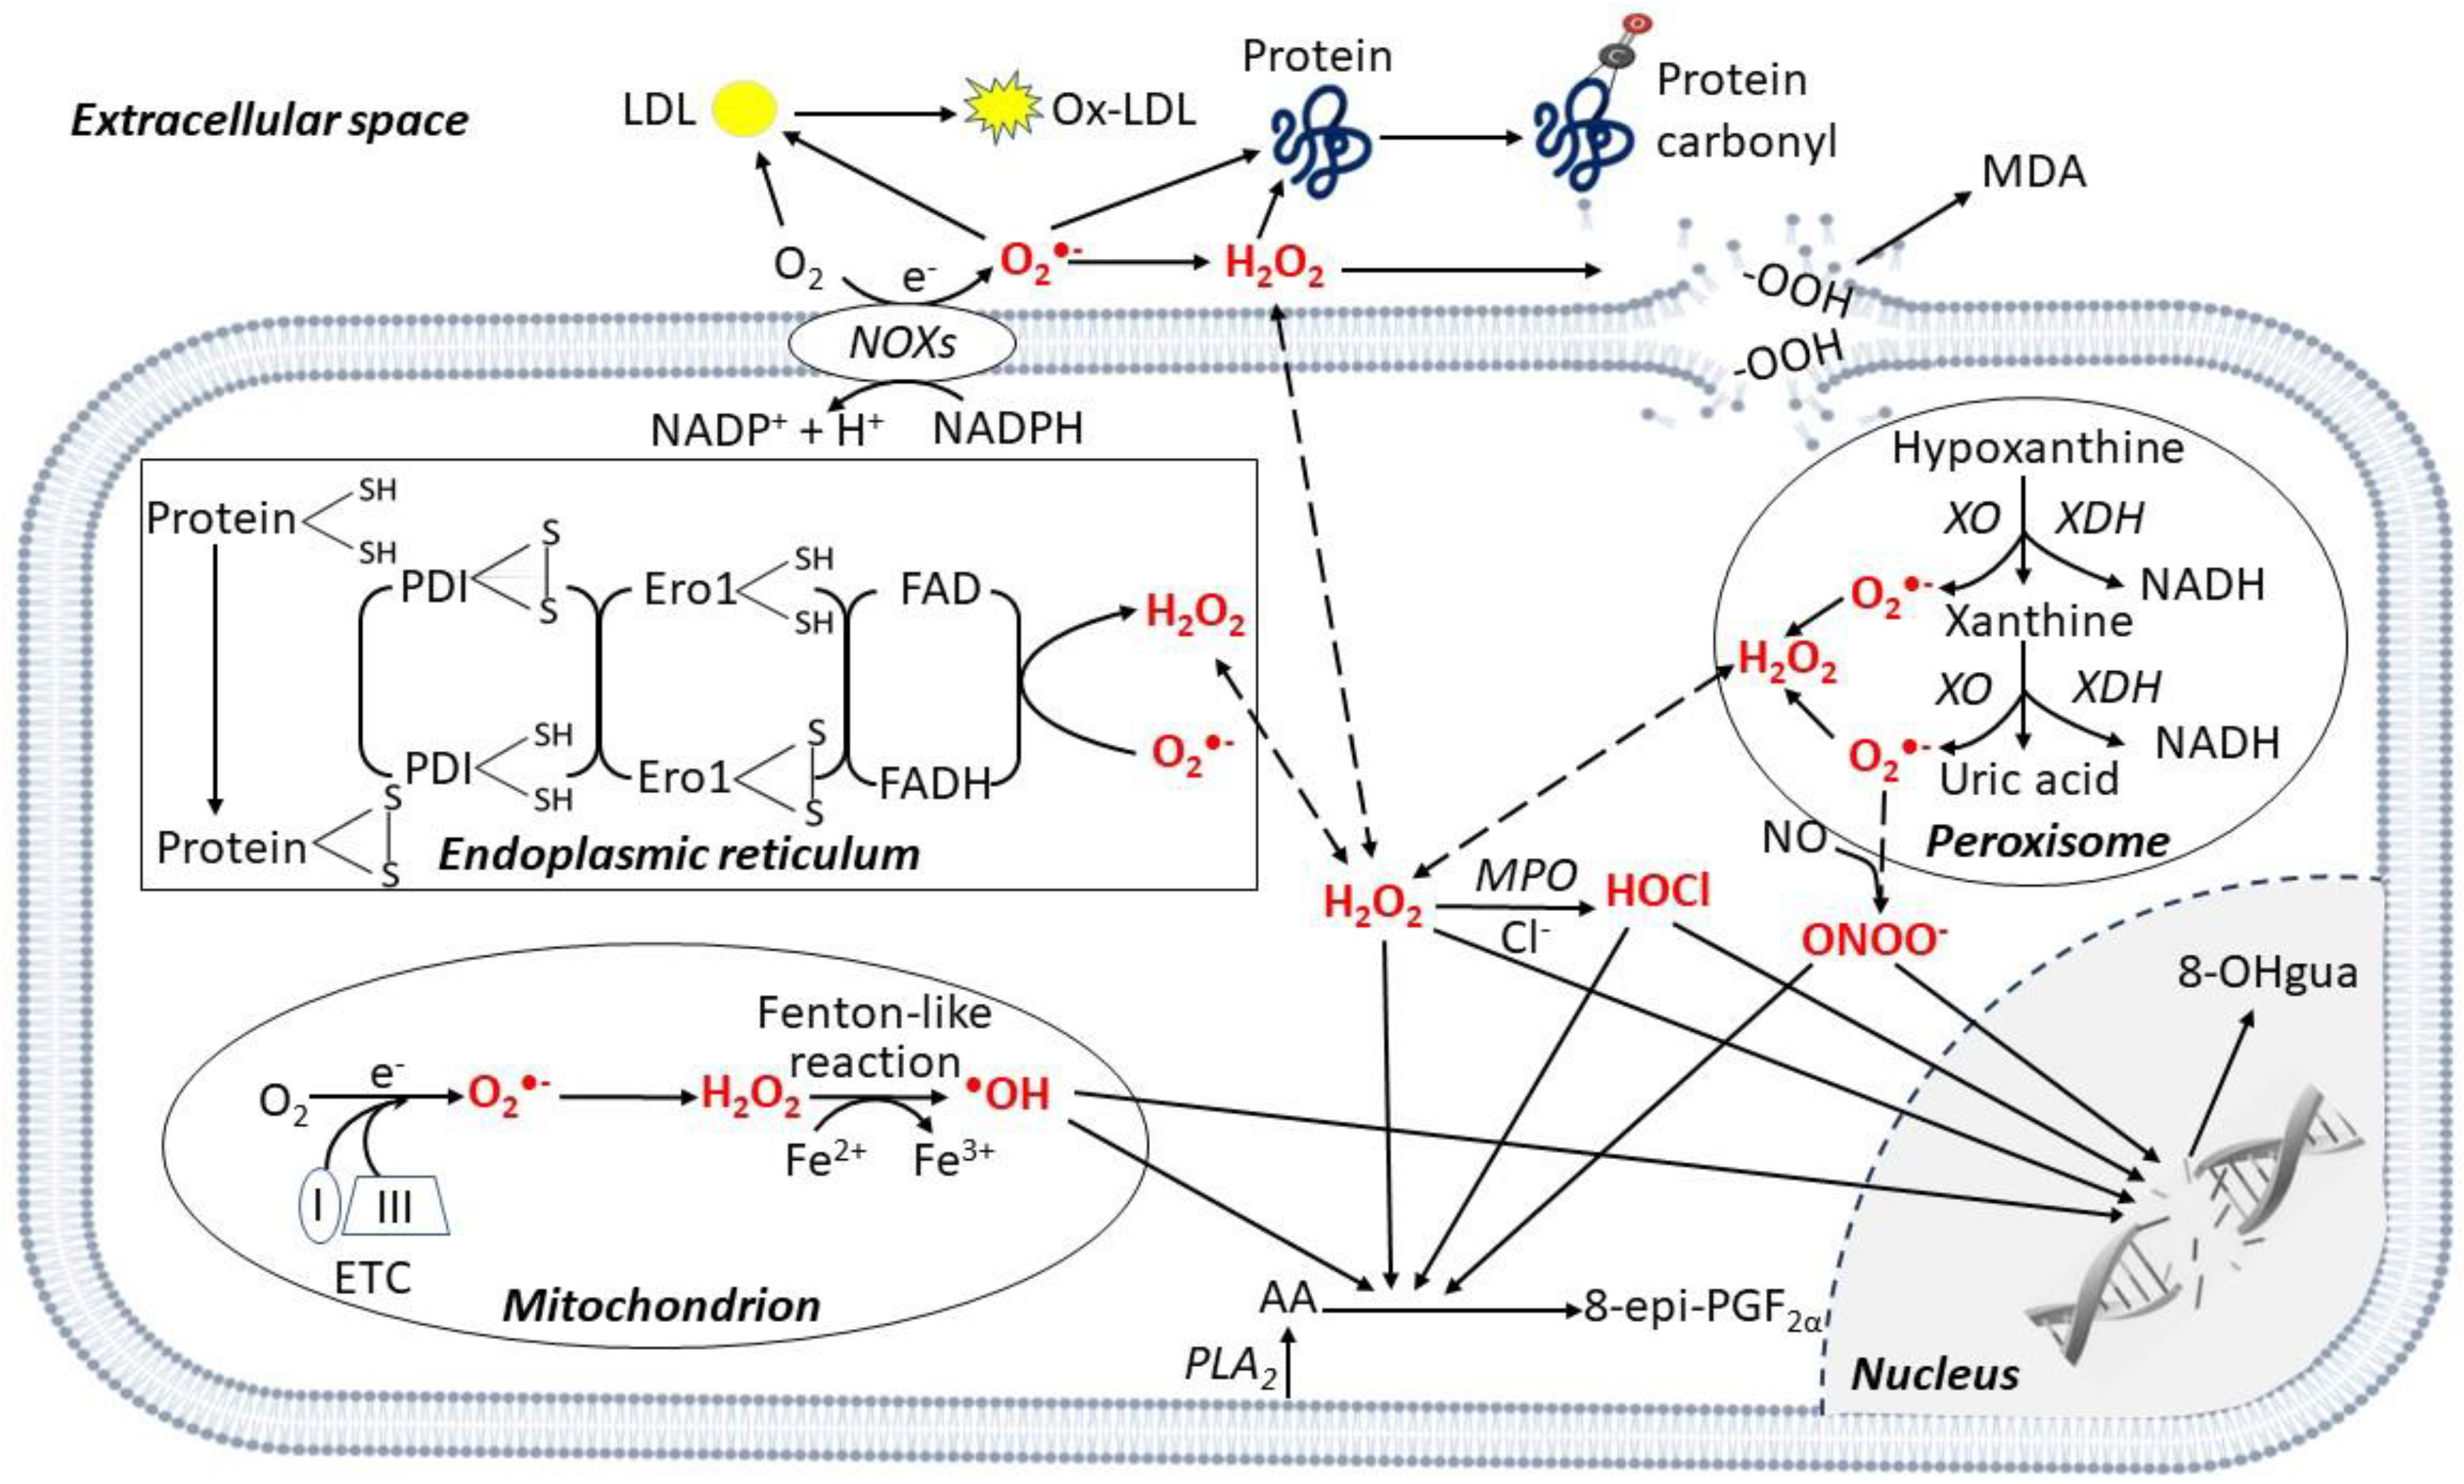 Antioxidants | Free Full-Text | Role of Oxidative Stress in the 